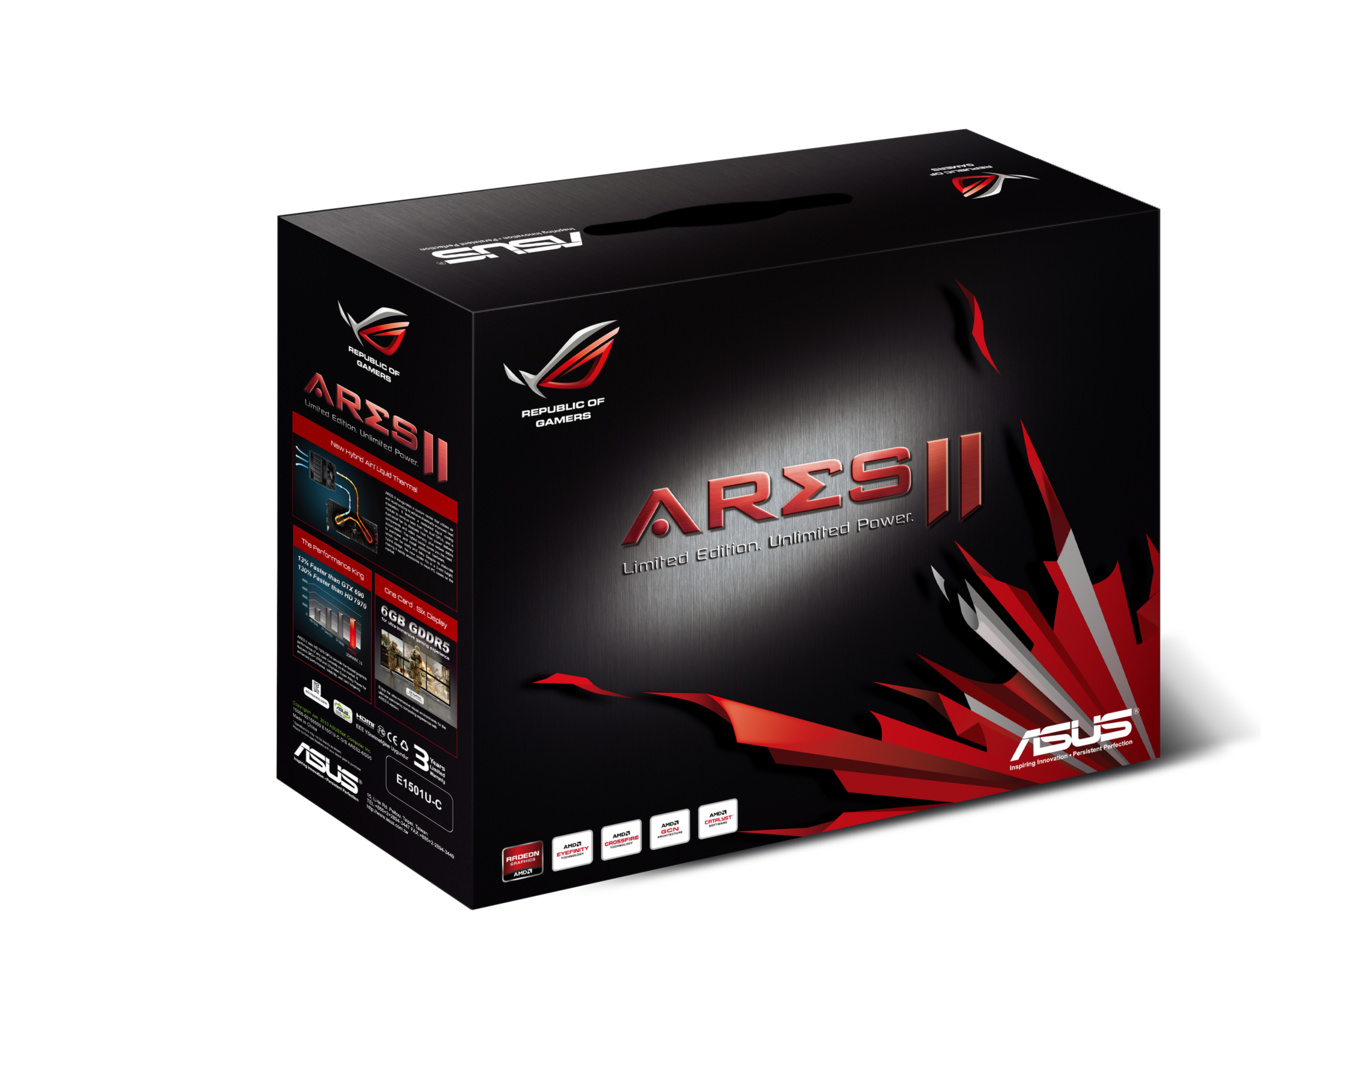 Ares 2 limited. Ares II 7990. ASUS ROG ares. ASUS hd7990. 2 Ядерная видеокарта.